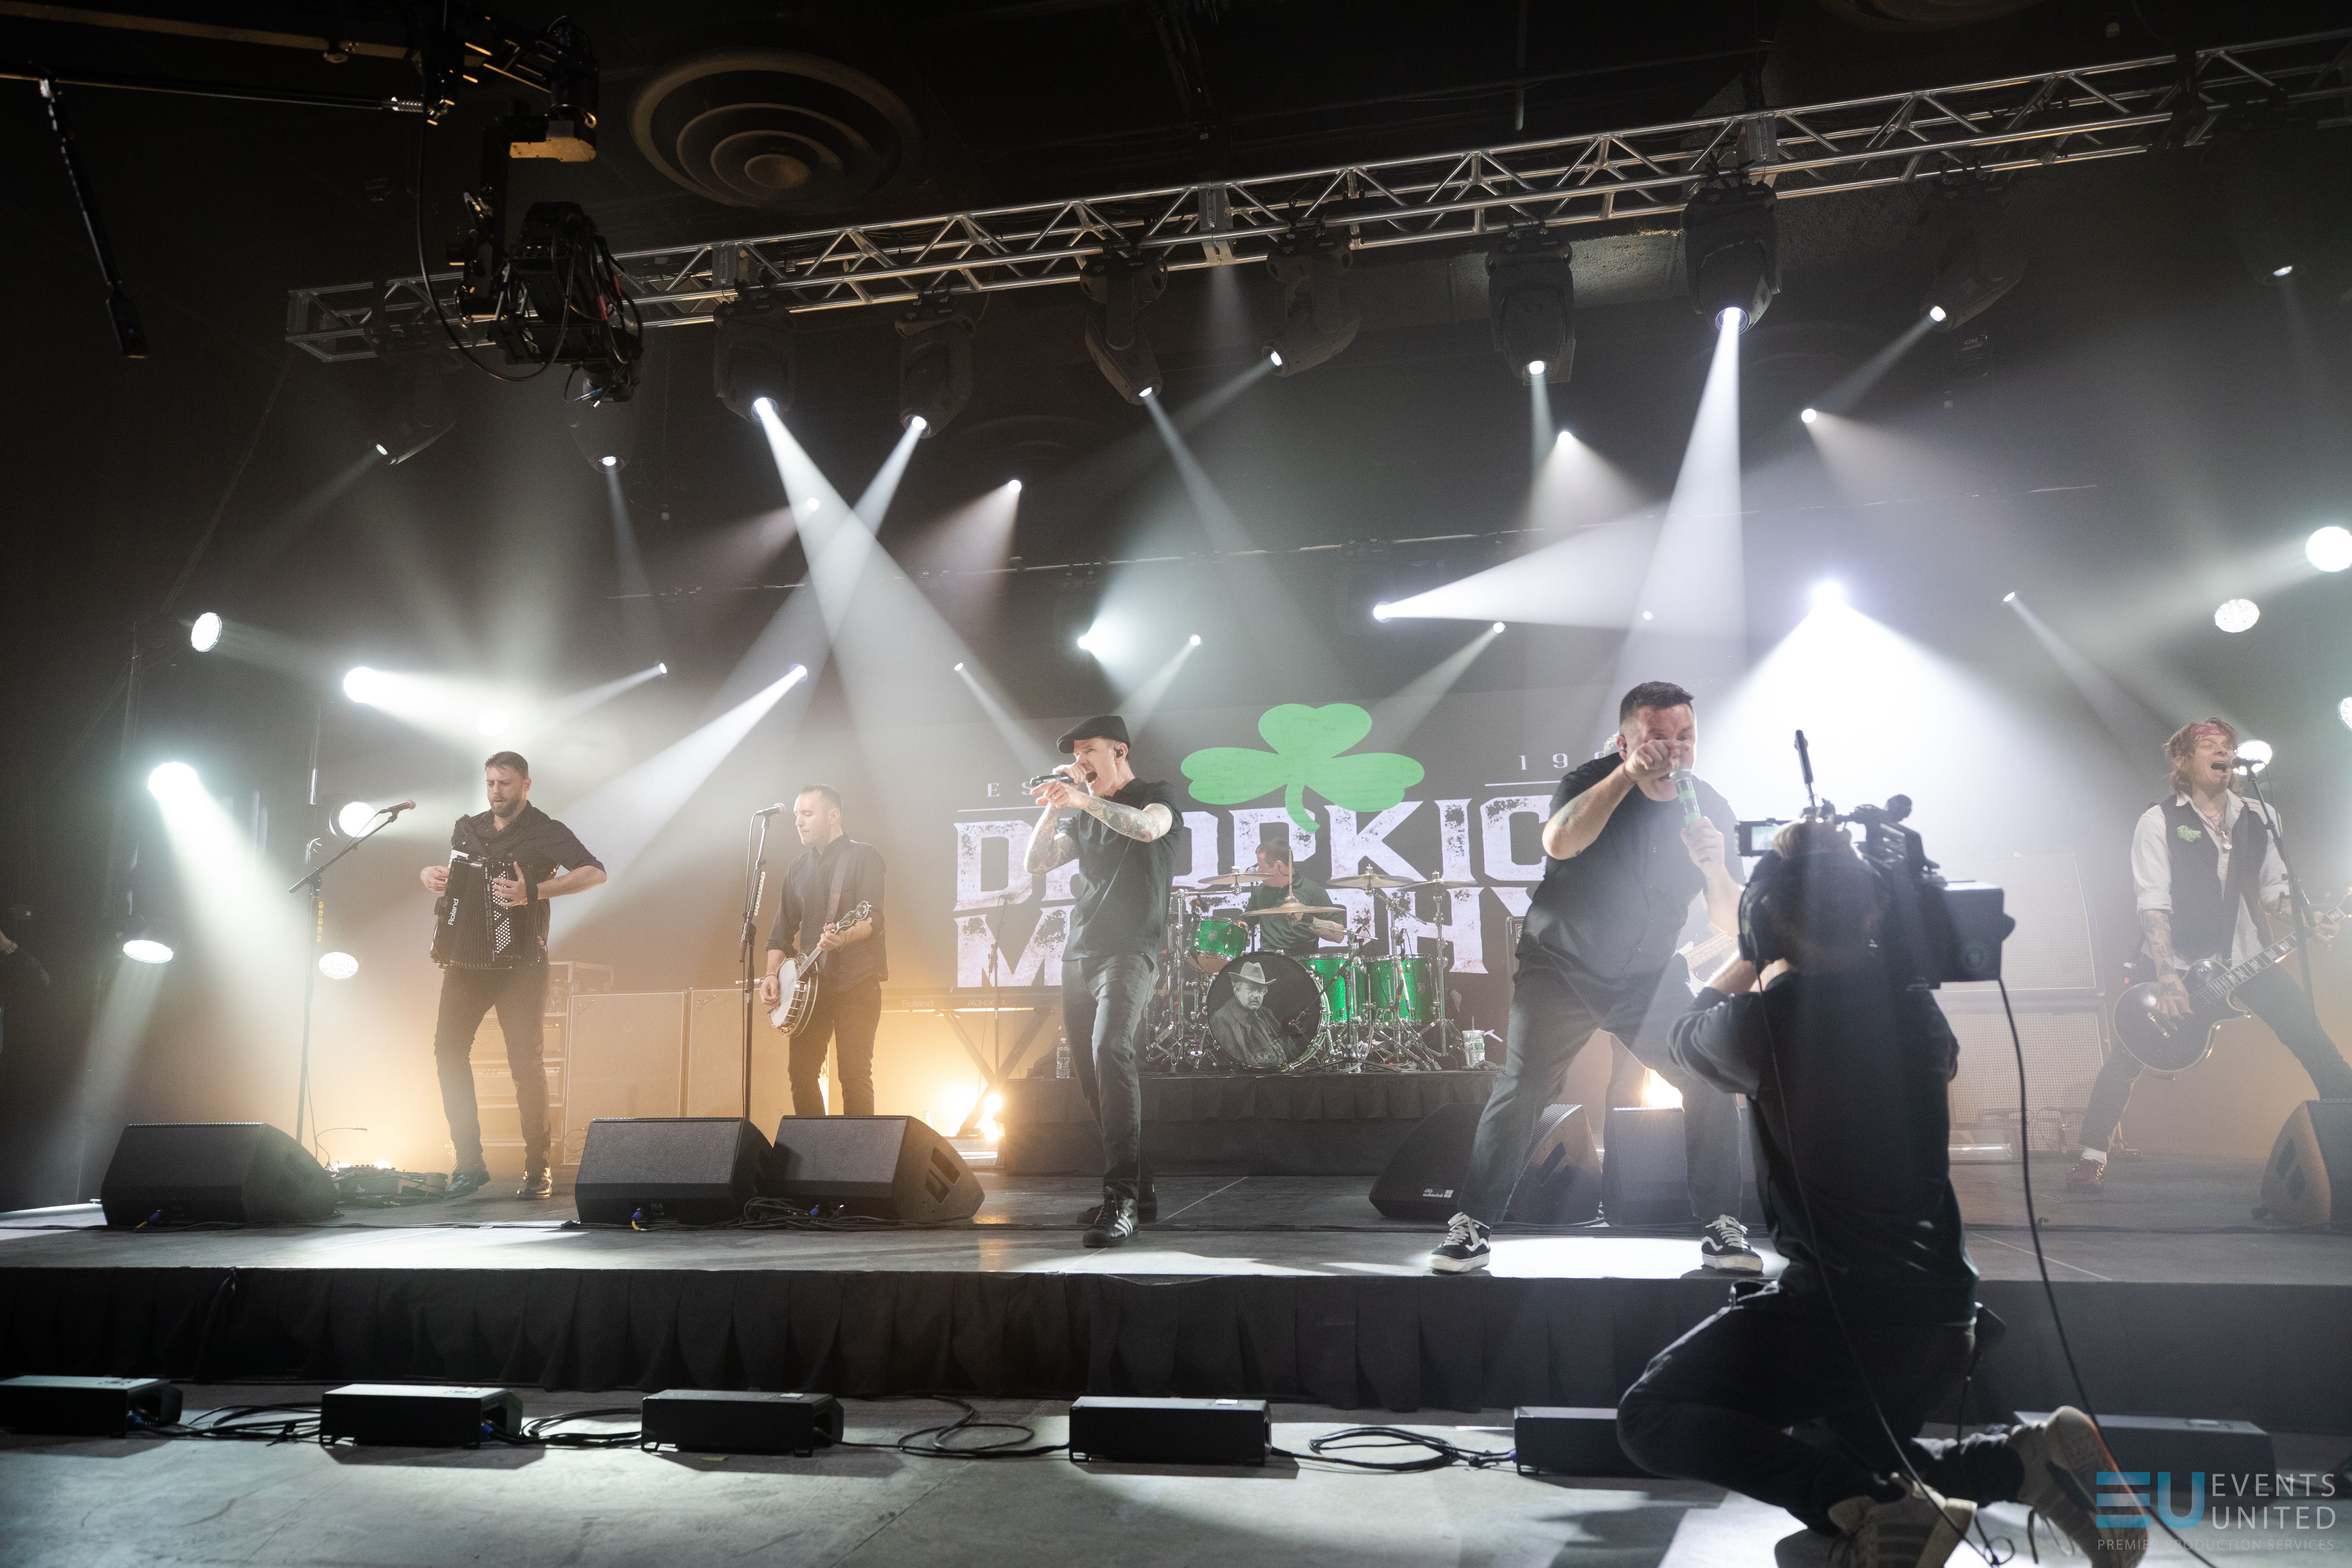 10 Million People Watched the Dropkick Murphys Play Online. Is